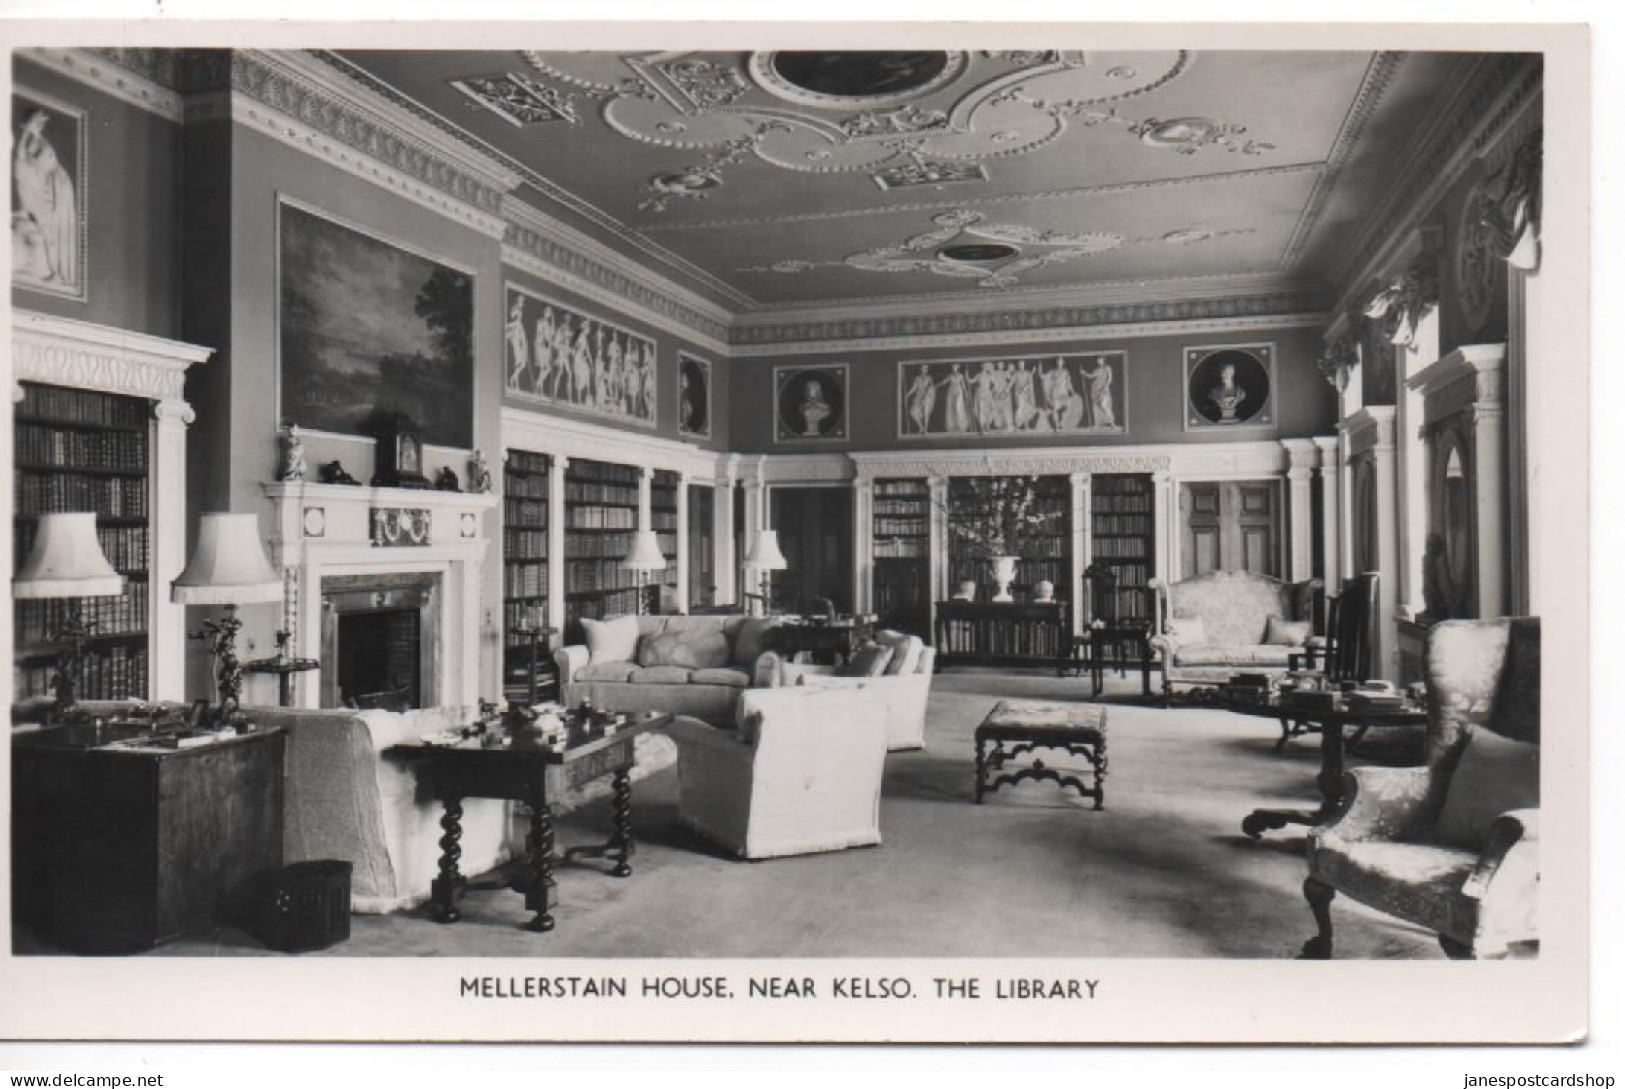 MELLERSTAIN HOUSE NR KELSO - THE LIBRARY - REAL PHOTO POSTCARD  - SCOTLAND - Roxburghshire